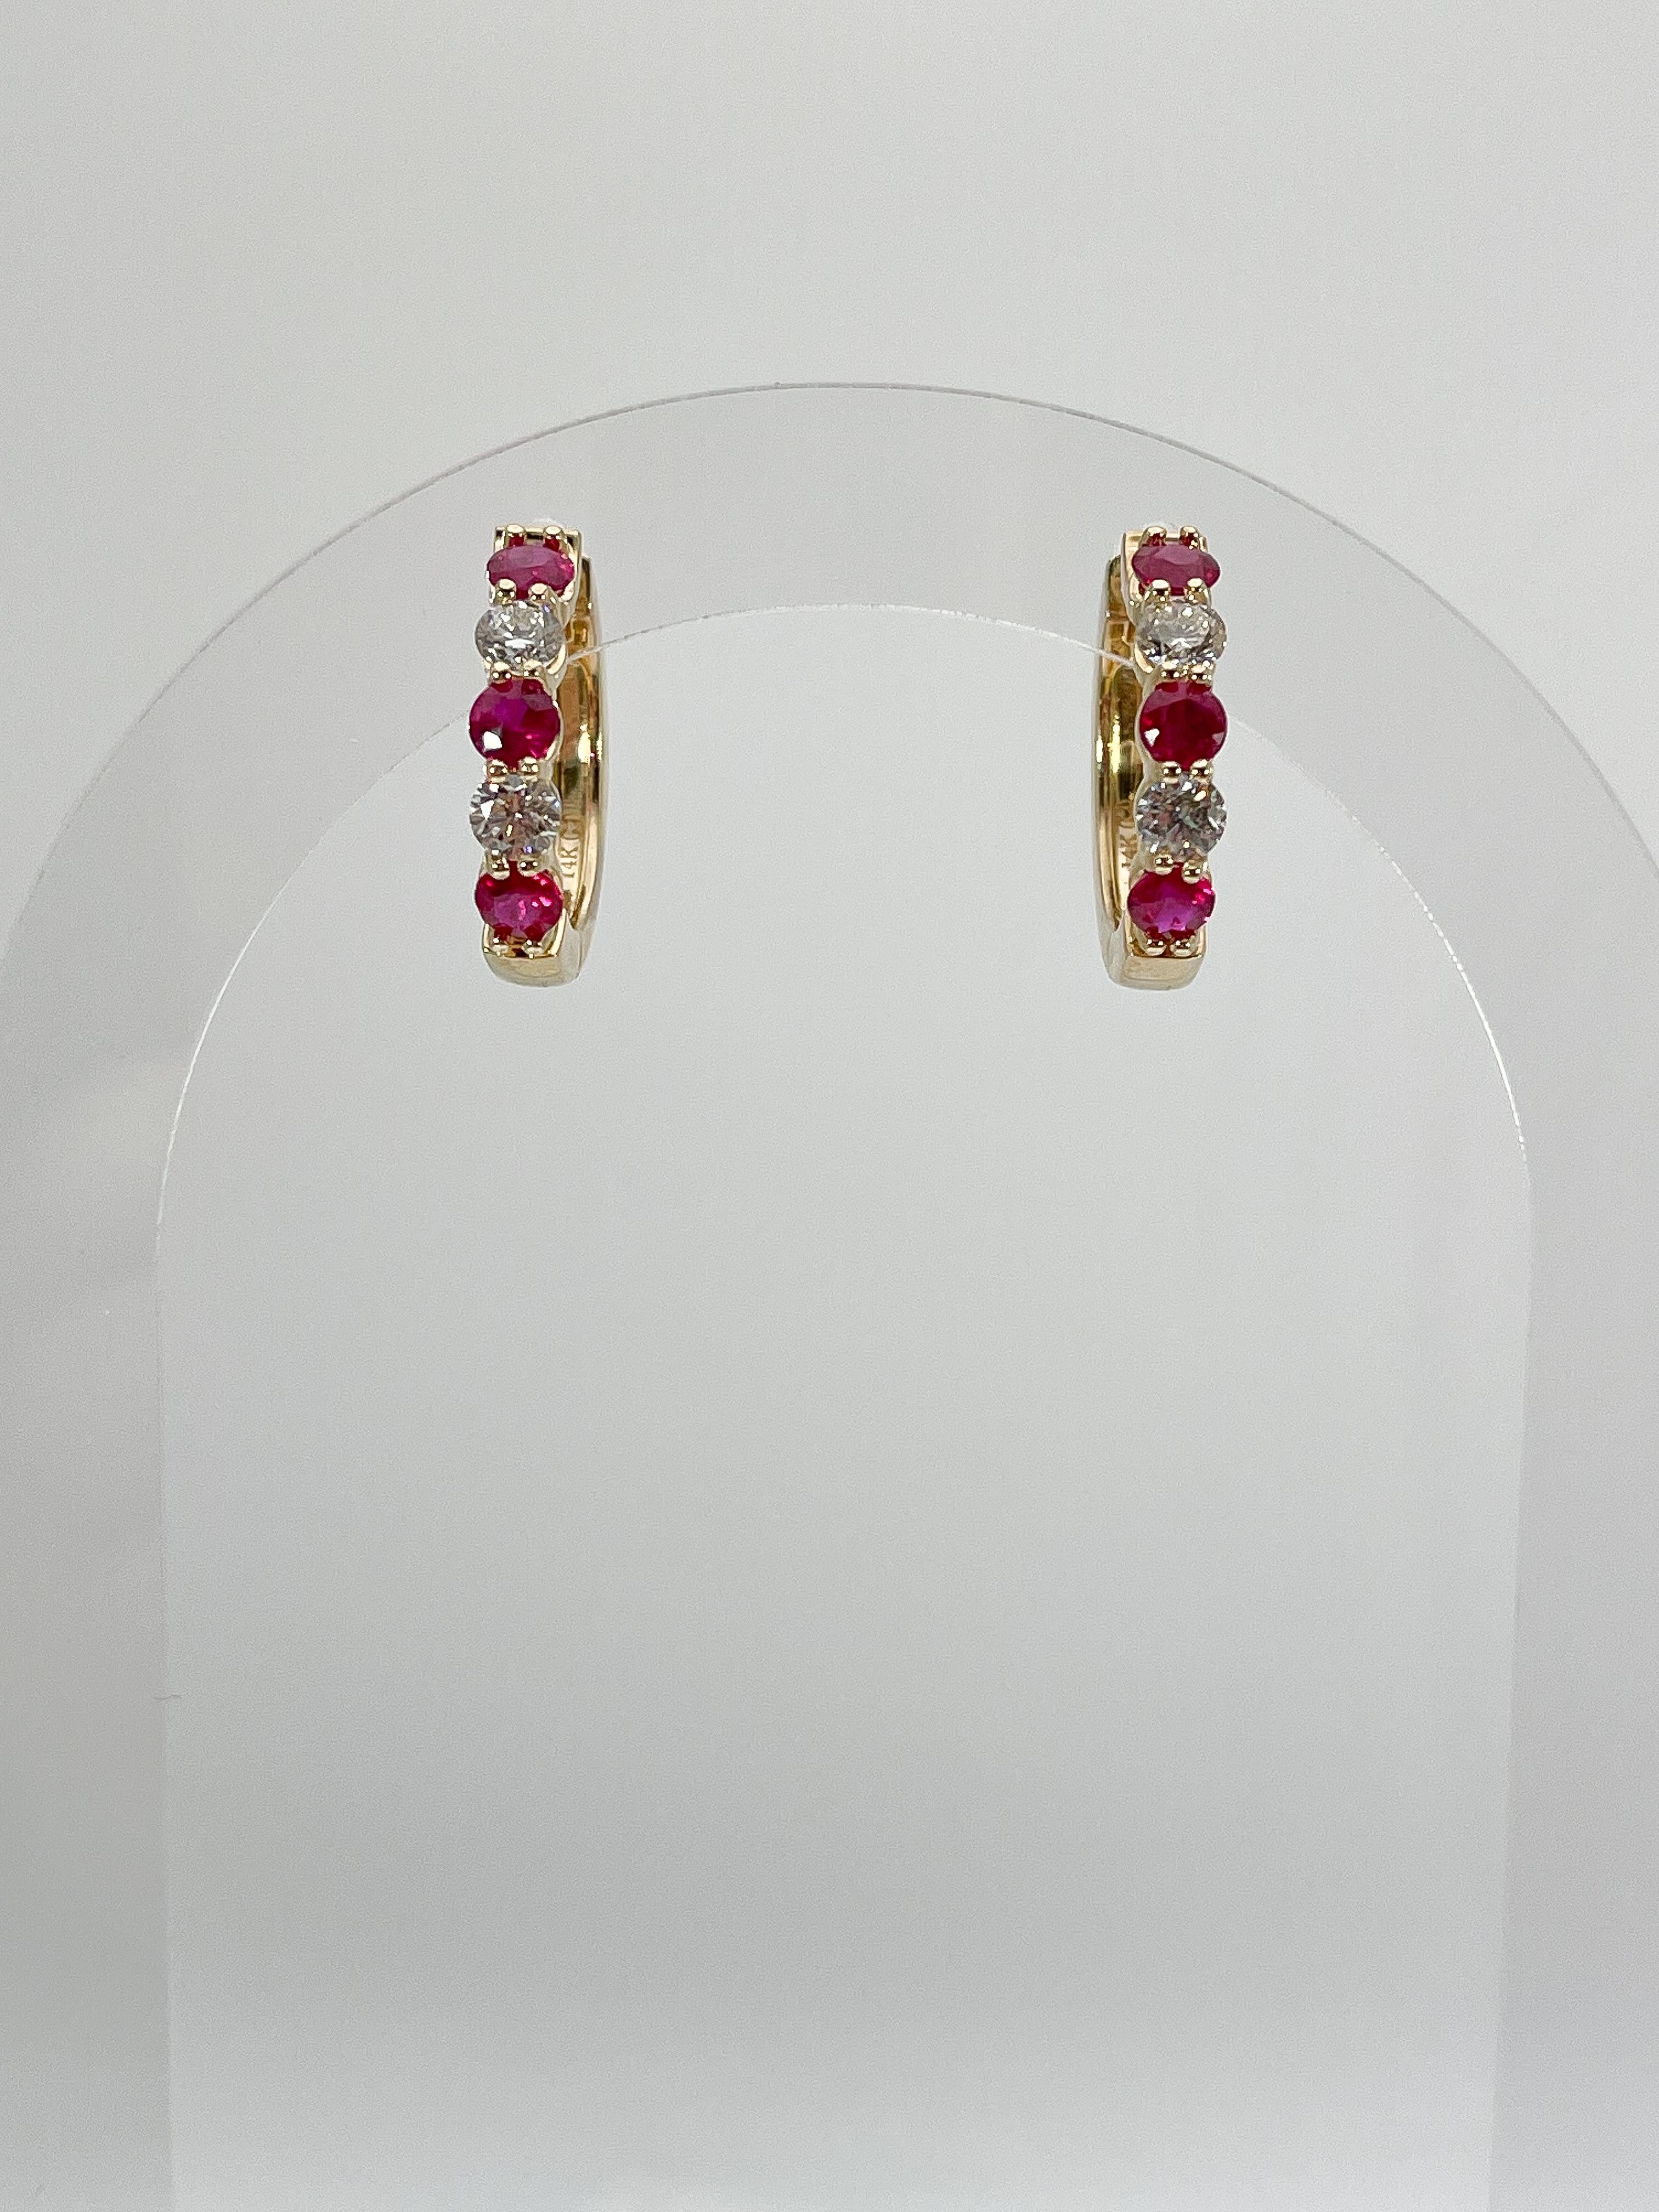 14k yellow gold .84 CTW diamond and 1.54 CTW Ruby Hoops. The stones in these earrings are all round, the measurements are 19.6 x 20, and they have a total weight of 6.95 grams.